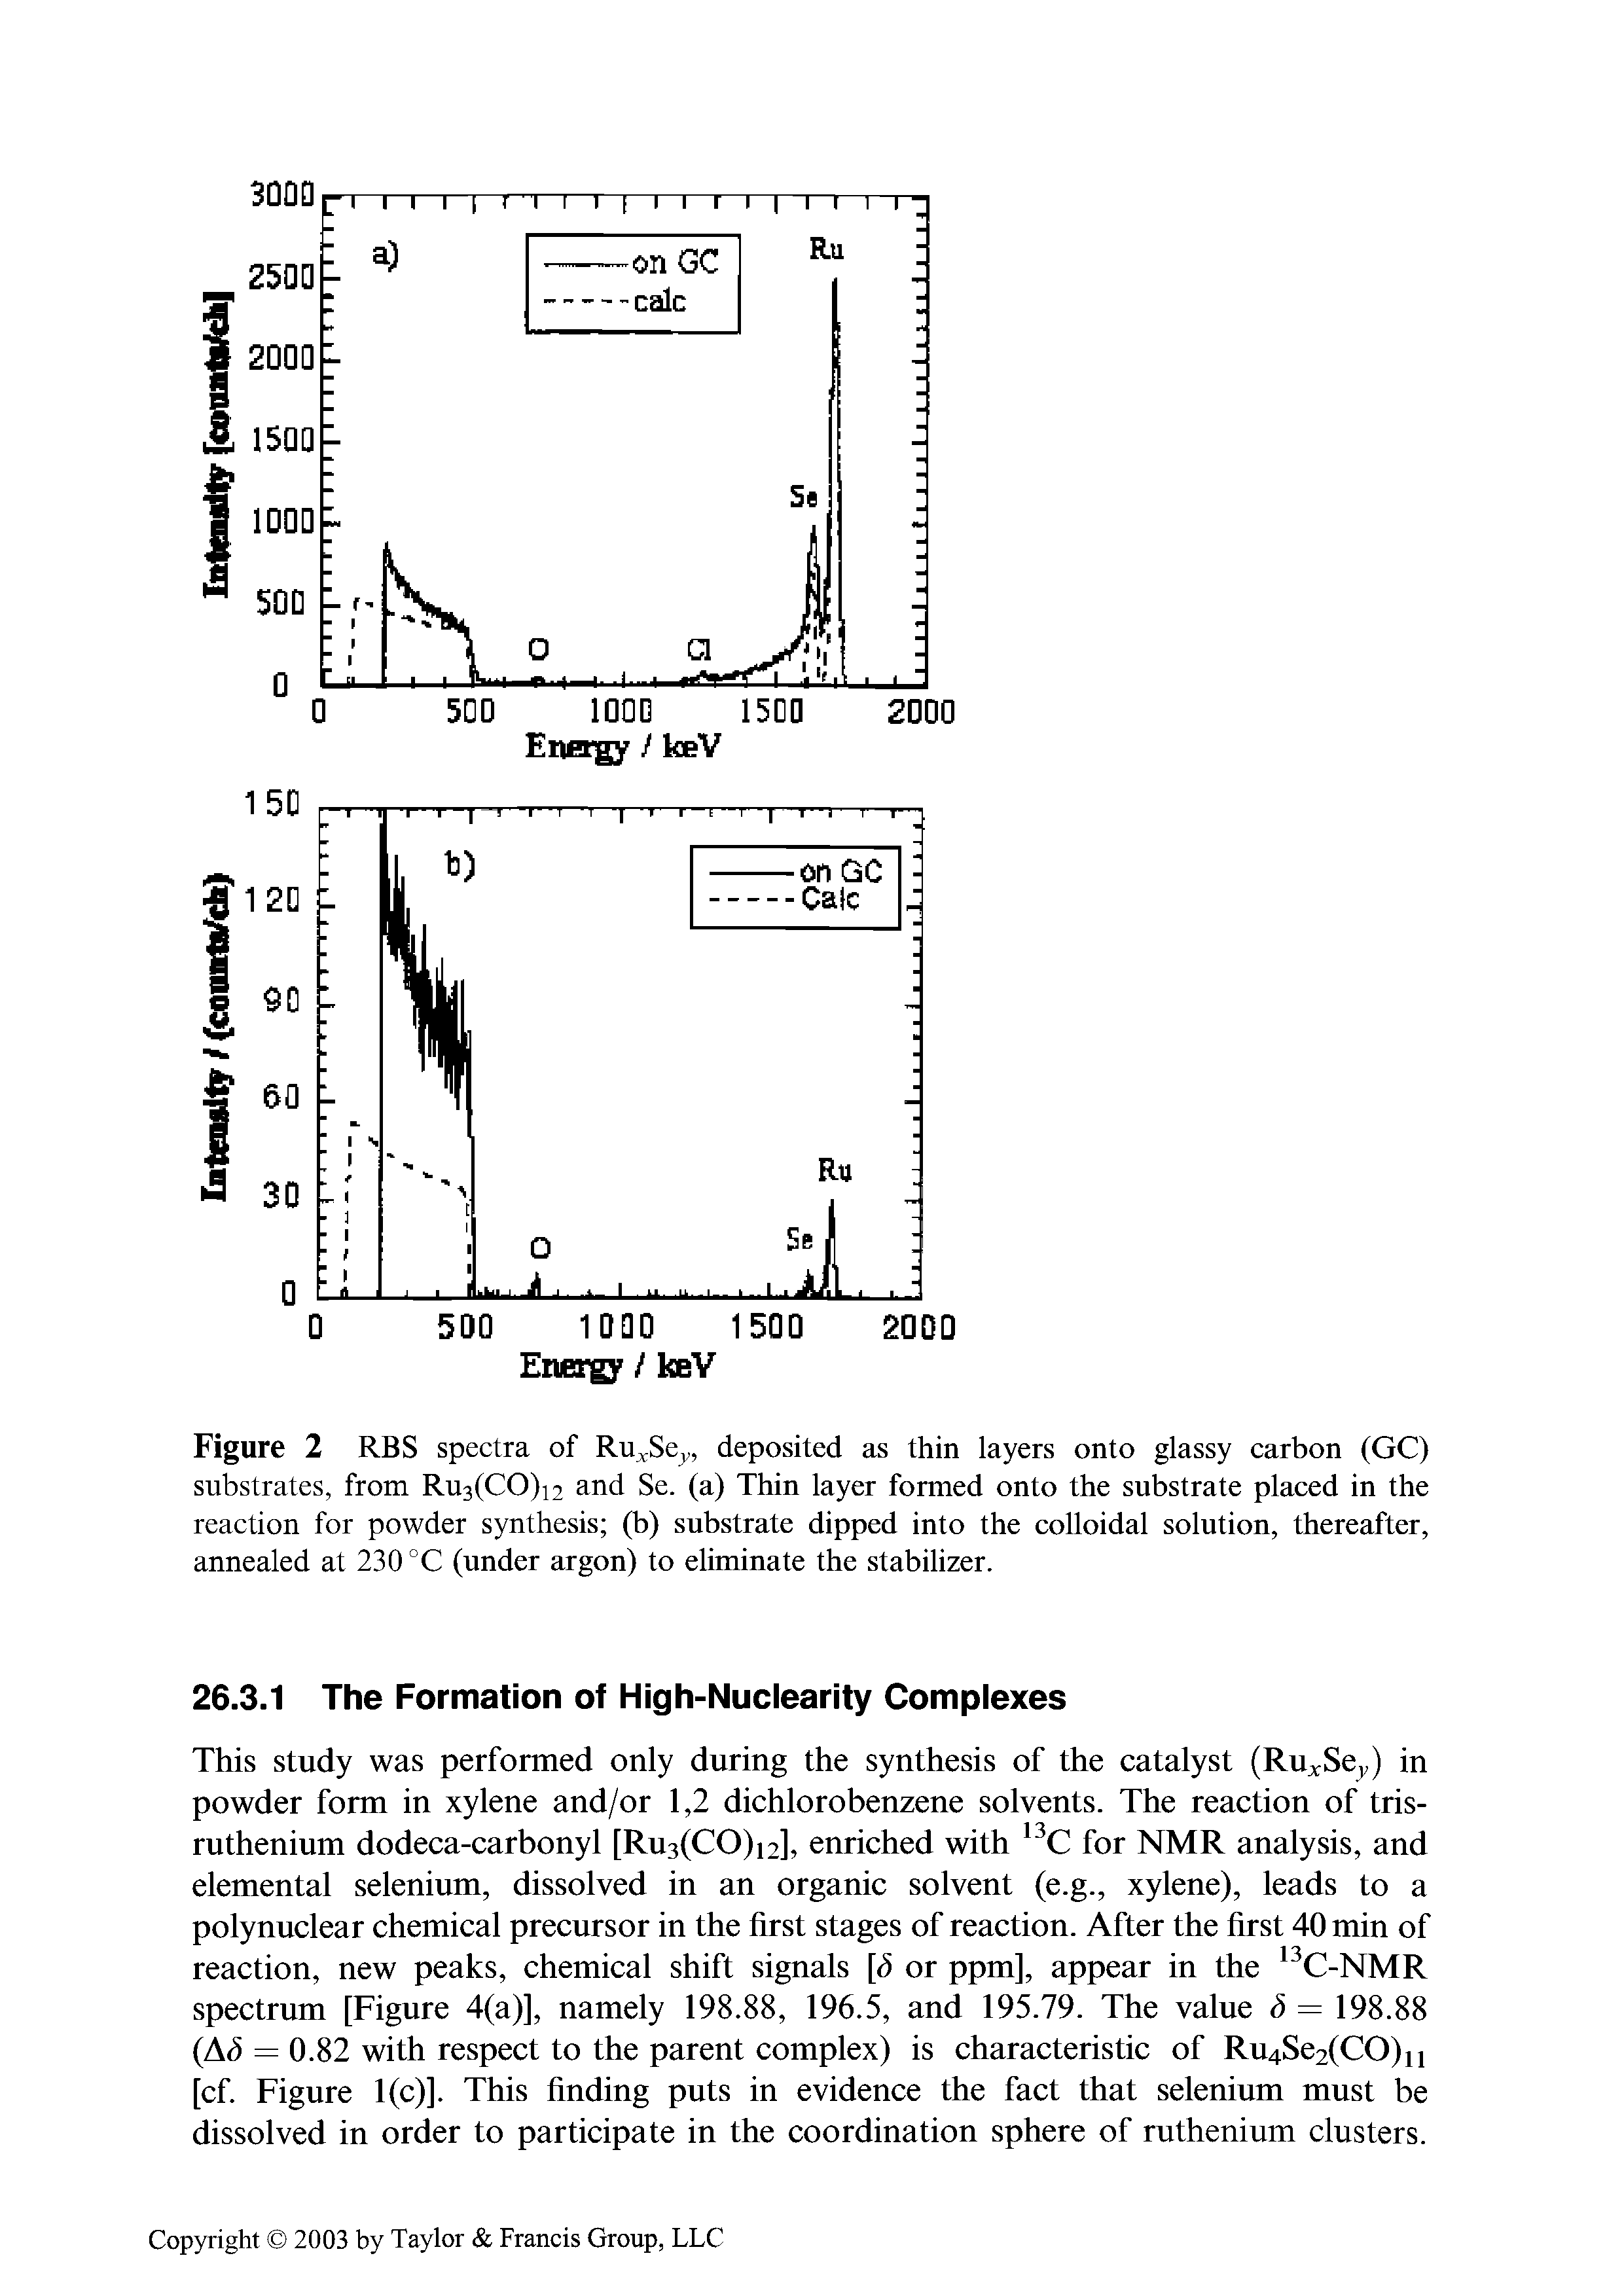 Figure 2 RBS spectra of Ru Se, deposited as thin layers onto glassy carbon (GC) substrates, from Ru3(CO)i2 and Se. (a) Thin layer formed onto the substrate placed in the reaction for powder synthesis (b) substrate dipped into the colloidal solution, thereafter, annealed at 230 °C (under argon) to eliminate the stabilizer.